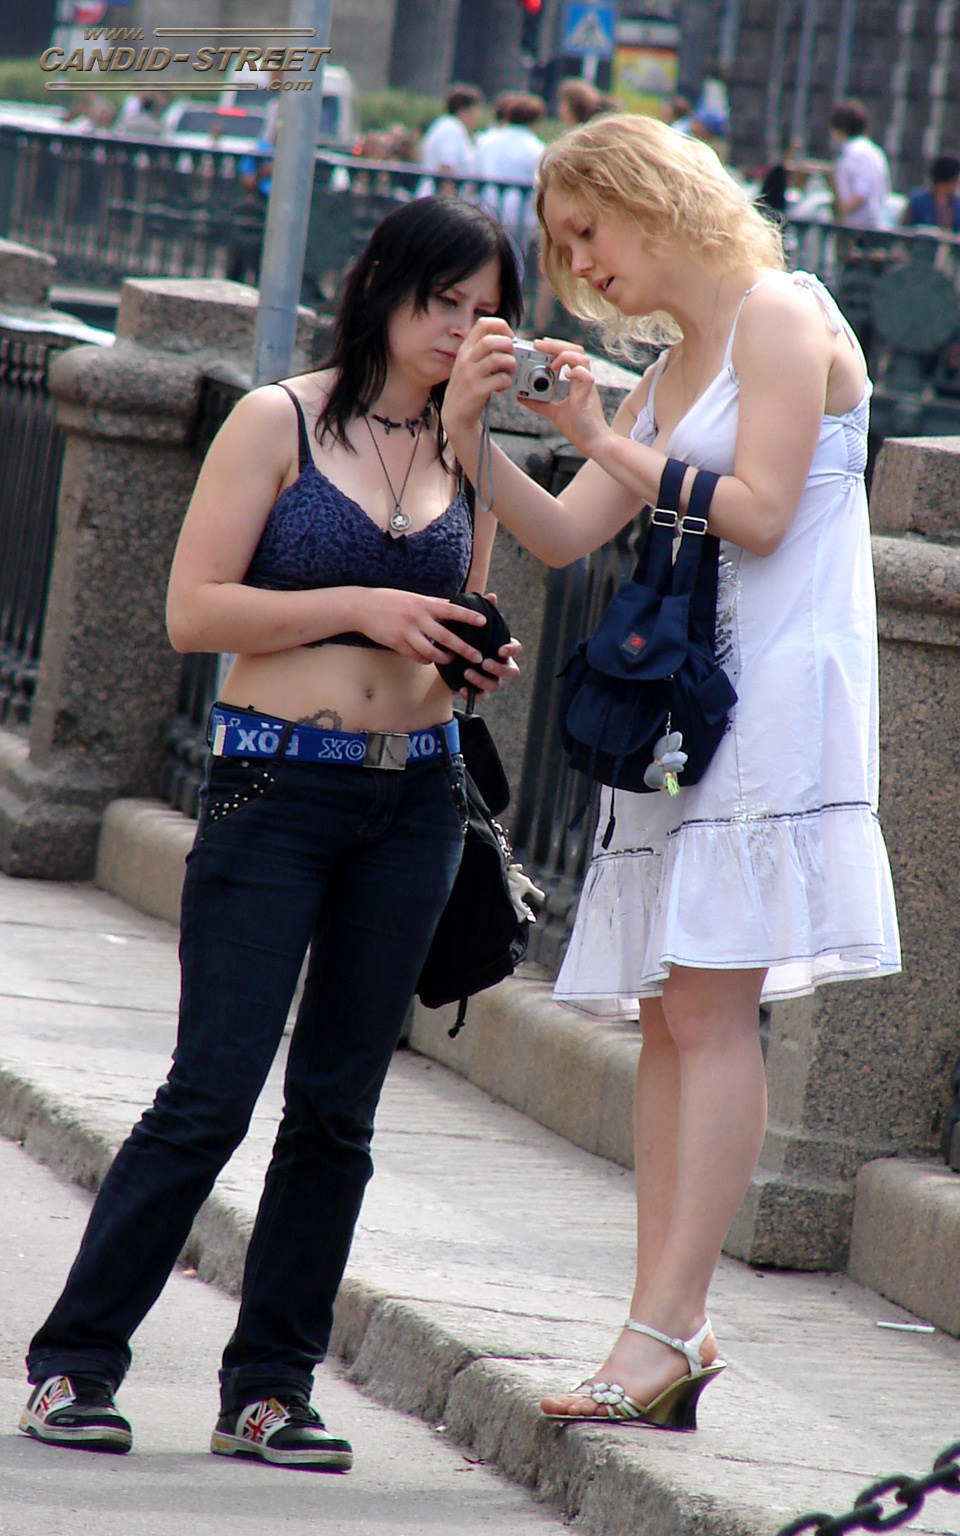 Busty girls candid shots - 23-dsc06960 from Candid Street